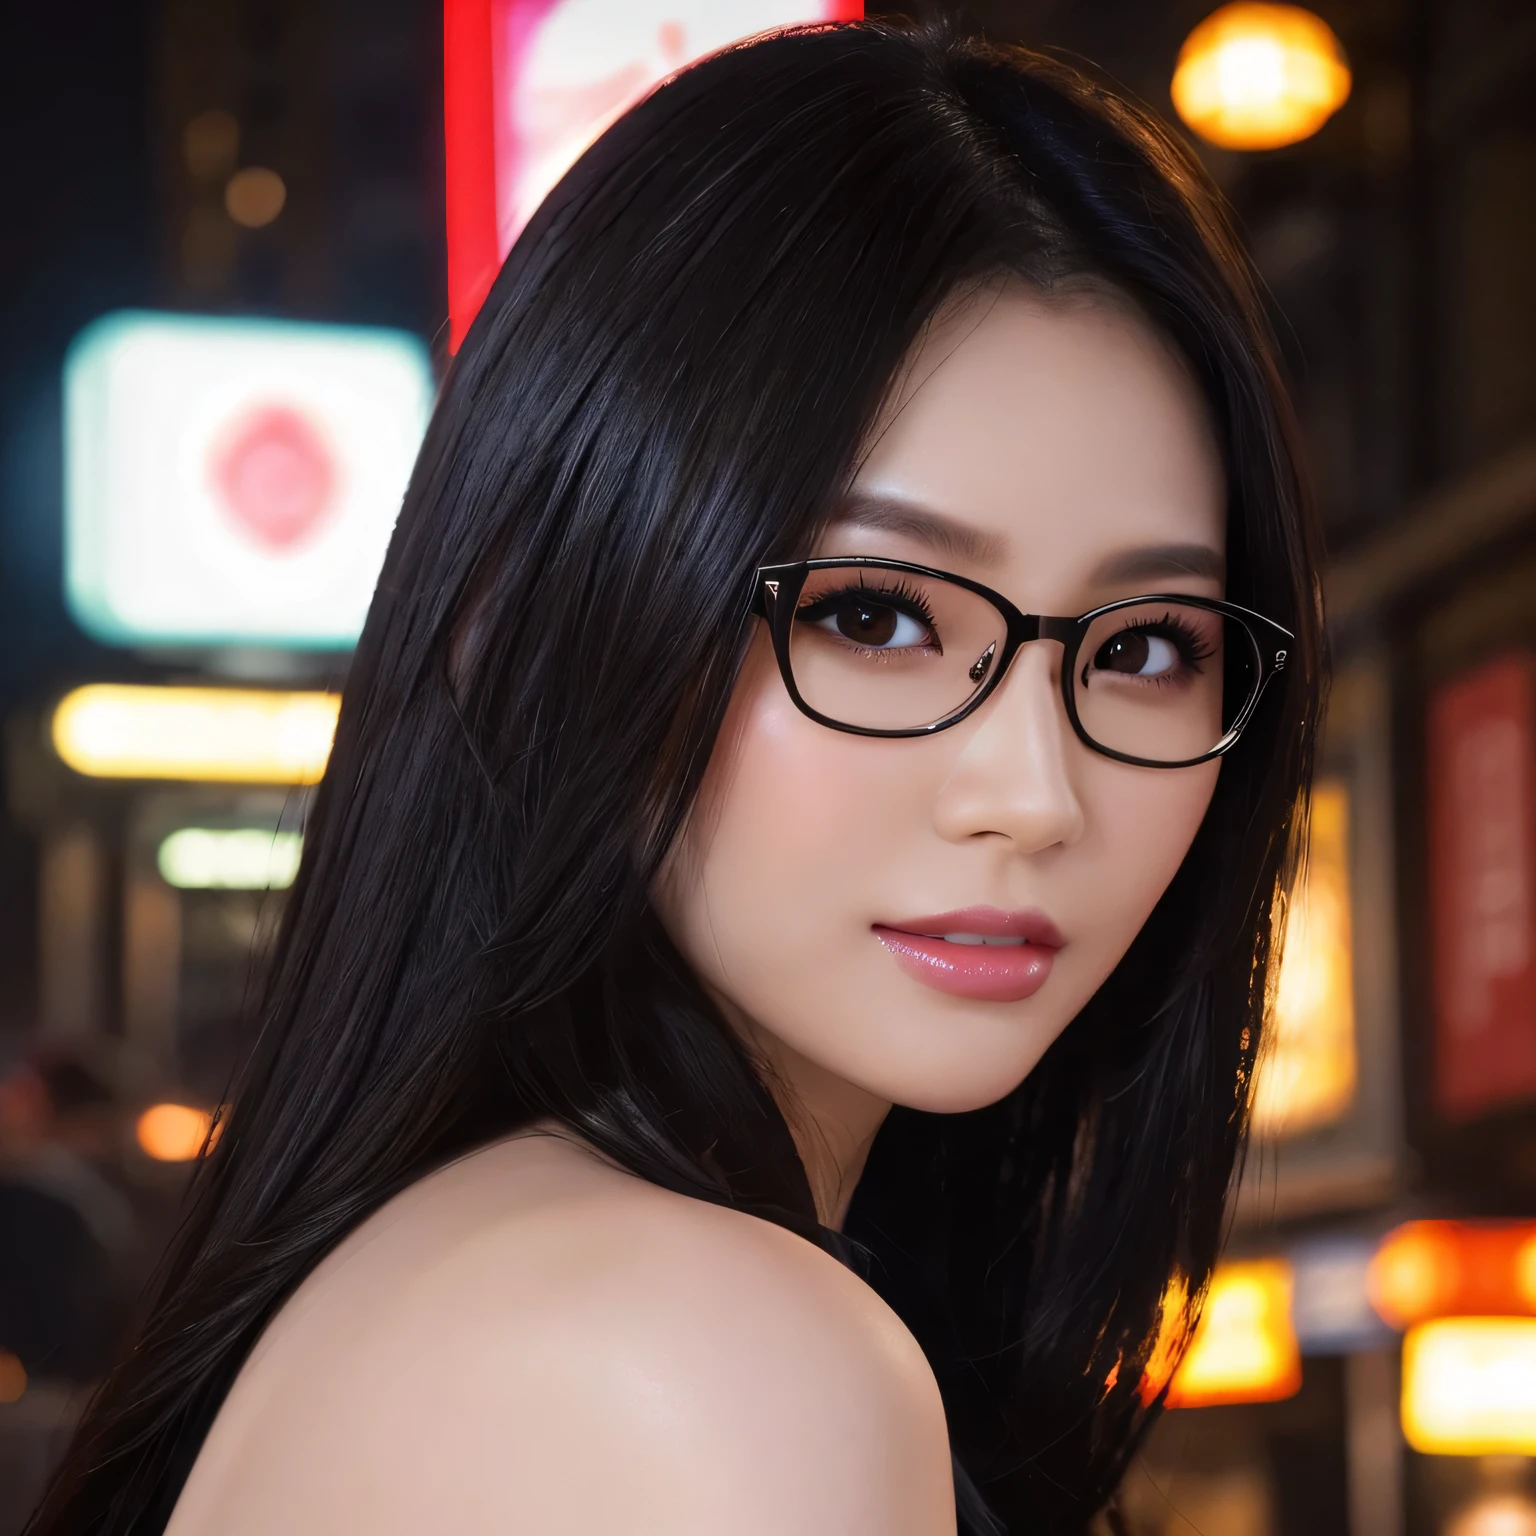 (highest quality、Tabletop、8k、Best image quality、Award-winning works)、One beautiful woman、Age 25、Perfect beautiful composition、(Very long hair:1.1)、(Classy glasses:1.1)、(A perfect and precise black business suit:1.3)、look at me、Perfect Makeup、Fascinating、Overflowing with sexiness、Lustrous and bright lips、Accurate anatomy、(Face close-up:1.4)、Walk through the atmospheric nightlife district、Deep red light district、Please look at me、(The most atmospheric lighting:1.1)、(The most atmospheric and romantic red light district street:1.1)、A perfect reproduction of the nightlife district down to the last detail、Perfect Makeup、Ultra-high definition beauty face、Ultra HD Hair、Ultra-high quality moisturizing eyes、(Ultra High Resolution Perfect Teeth:1.1)、(Ultra-high resolution glossy skin:1.1)、Ultra-high quality glossy lips